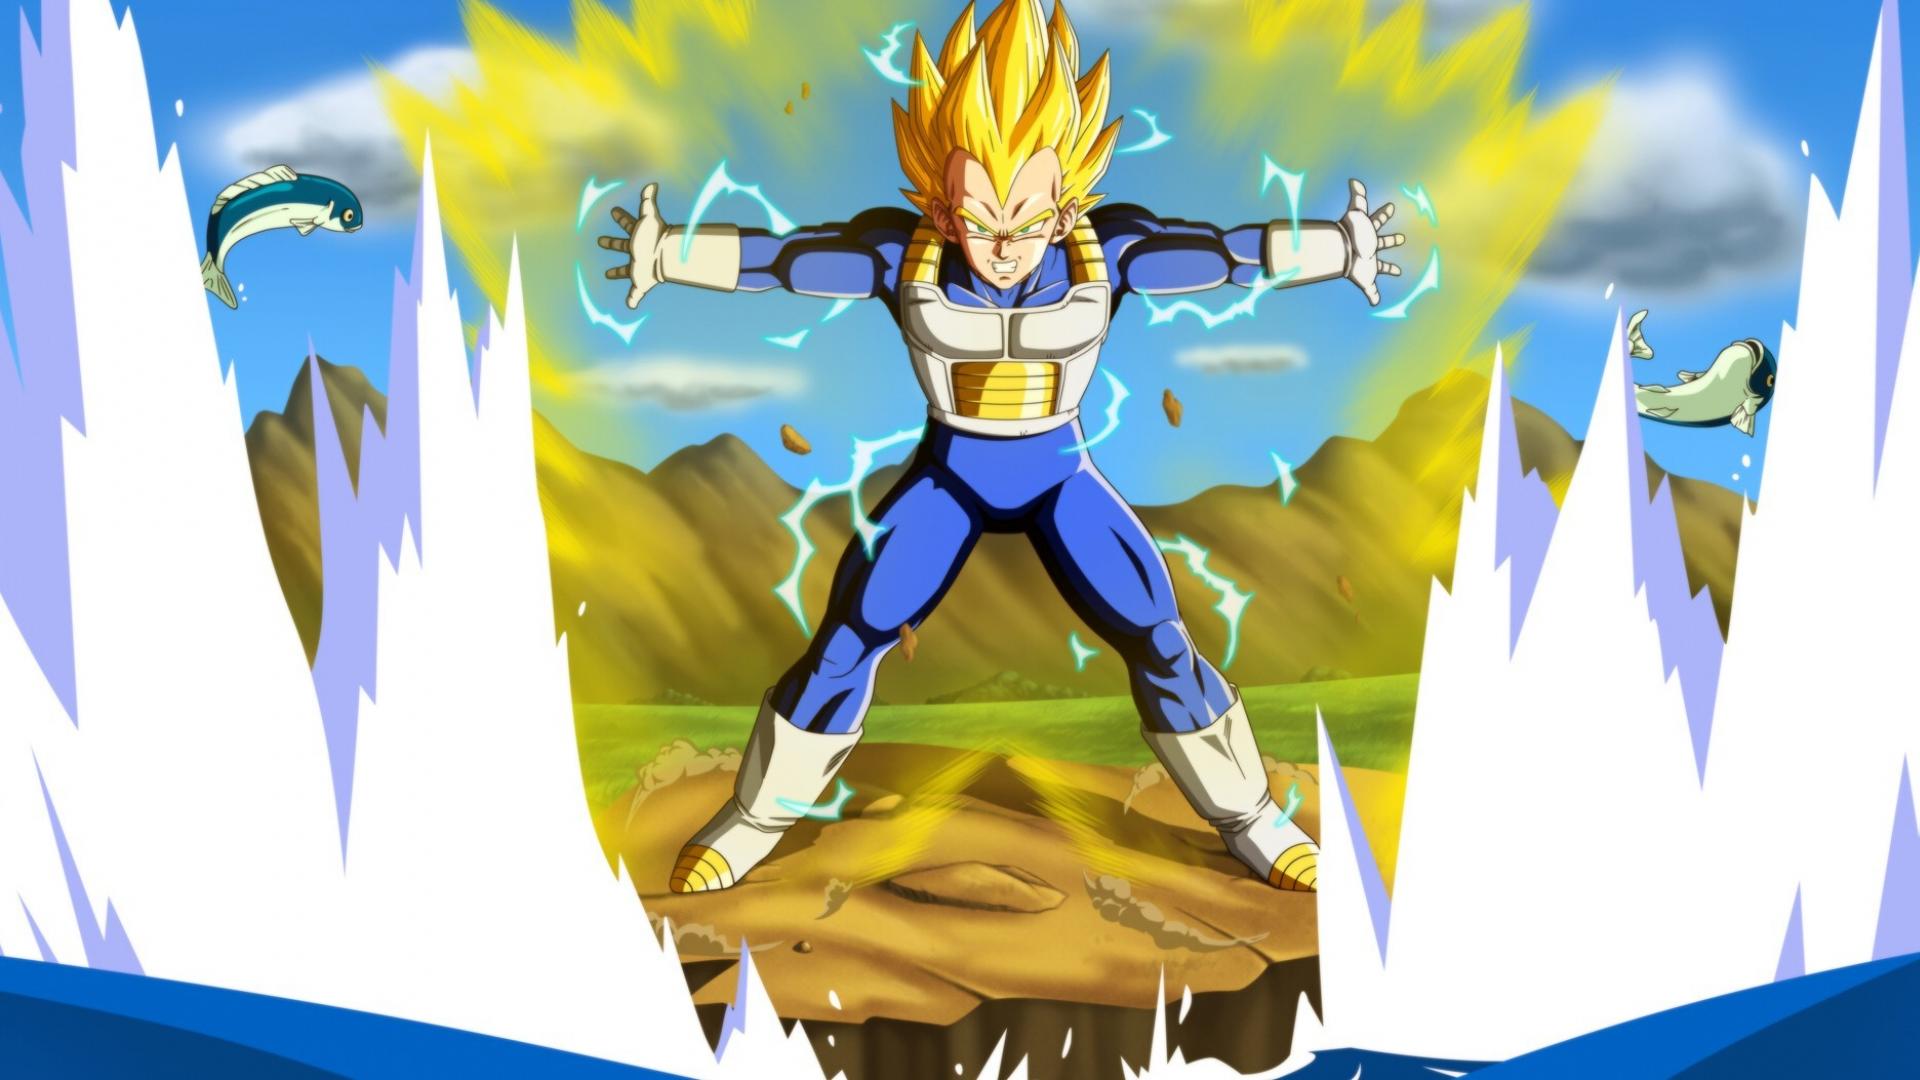 Goku And Vegeta With There Power God's 4K wallpaper download